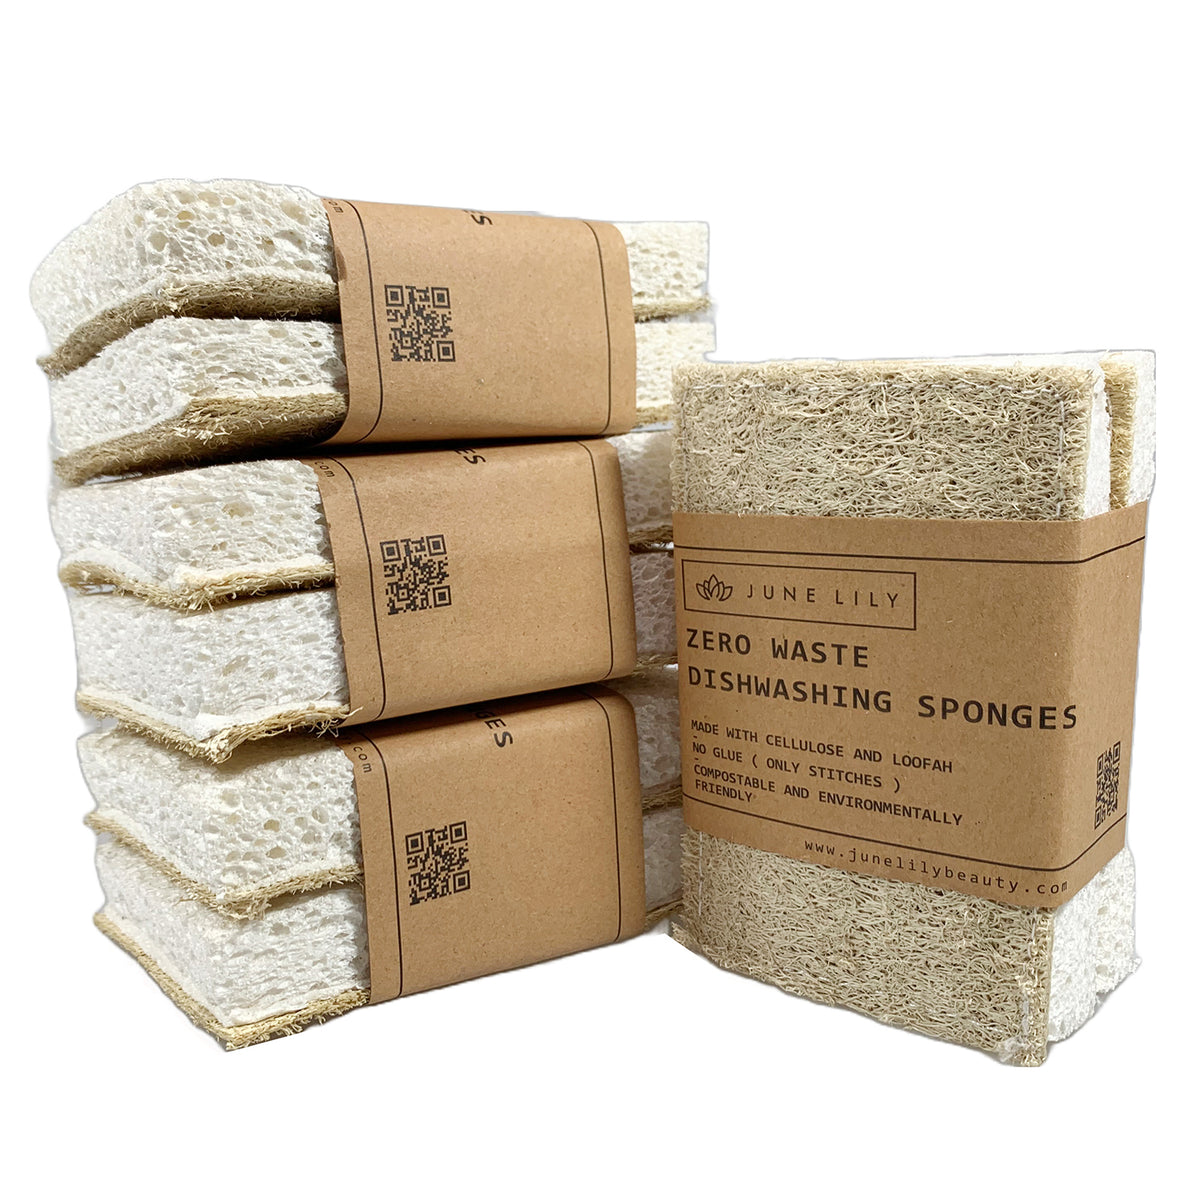 Kayannuo Christmas Clearance Kitchen Cleaning Sponges Eco Non-Scratch For  Dish Scrub Sponges 